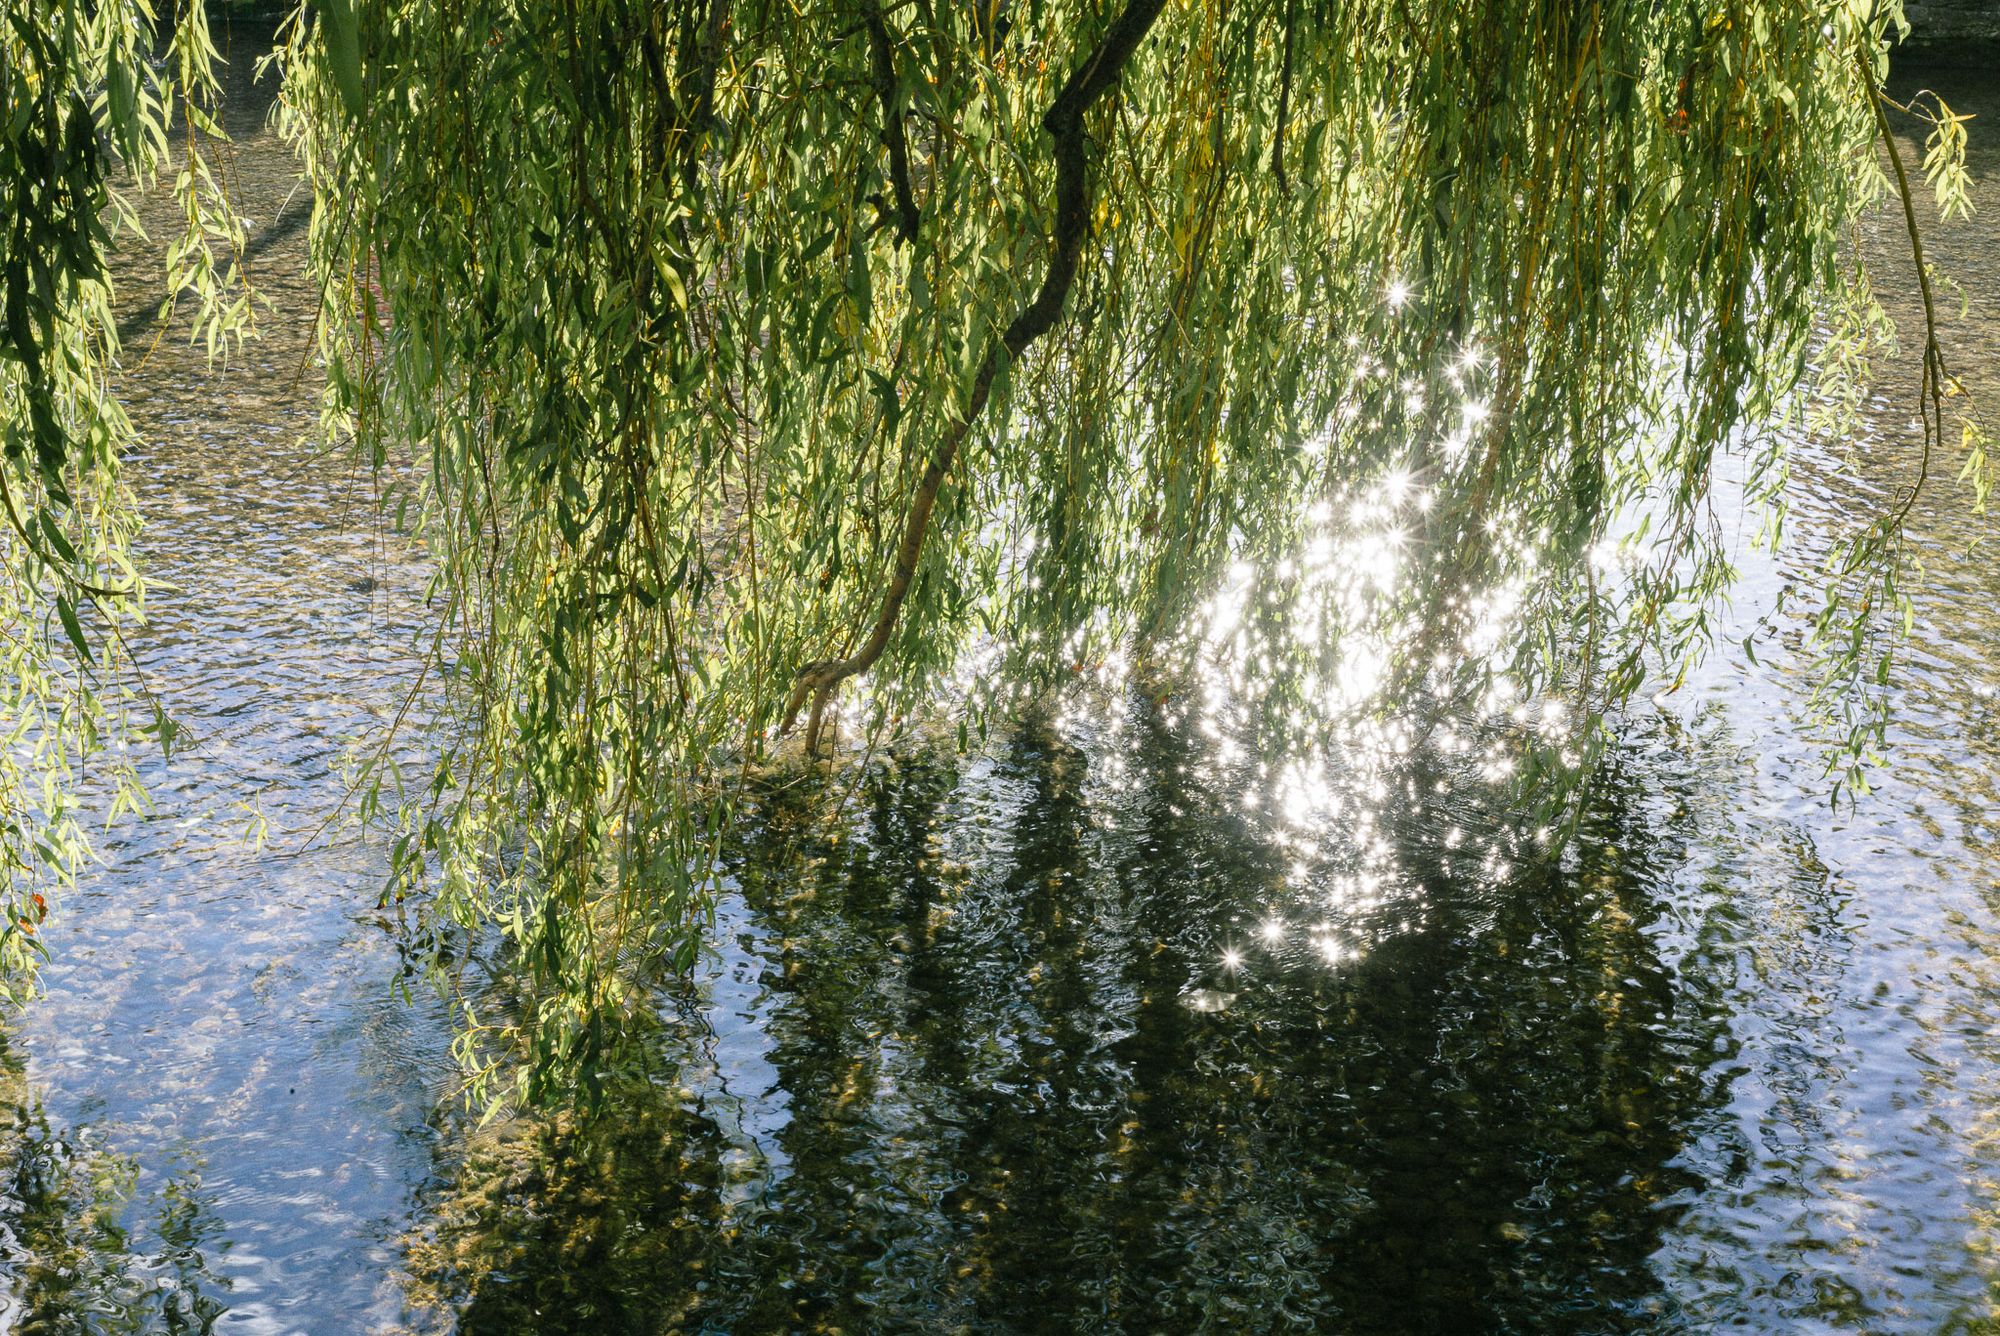 Branches from a willow tree reaching into a river on a sunny day.